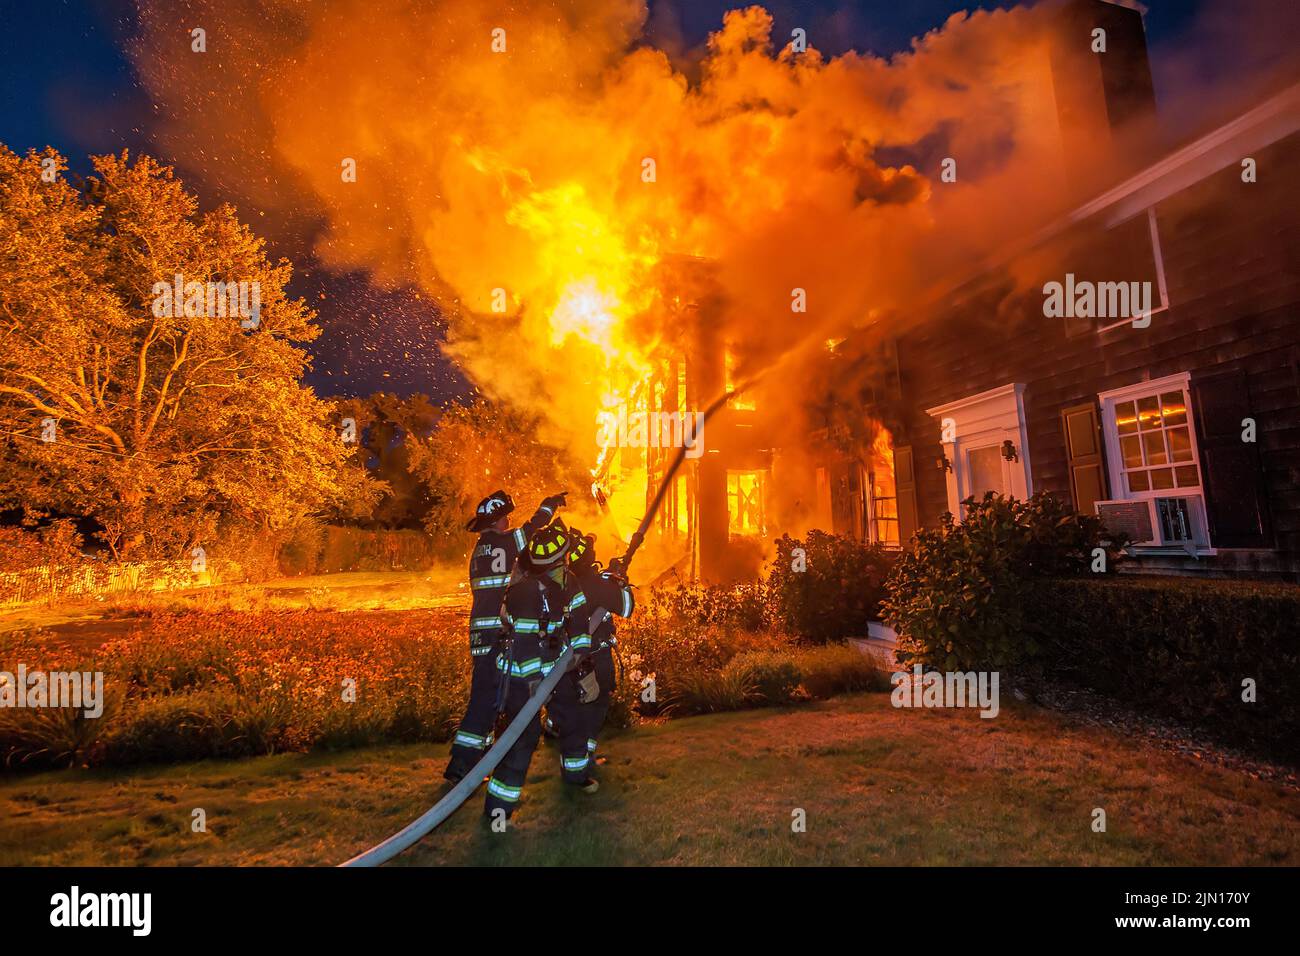 A hose team uses a hose to attack the fire as just before 6 a.m. on Monday, September 15th, 2014 the Bridgehampton Fire Department was called to 850 S Stock Photo